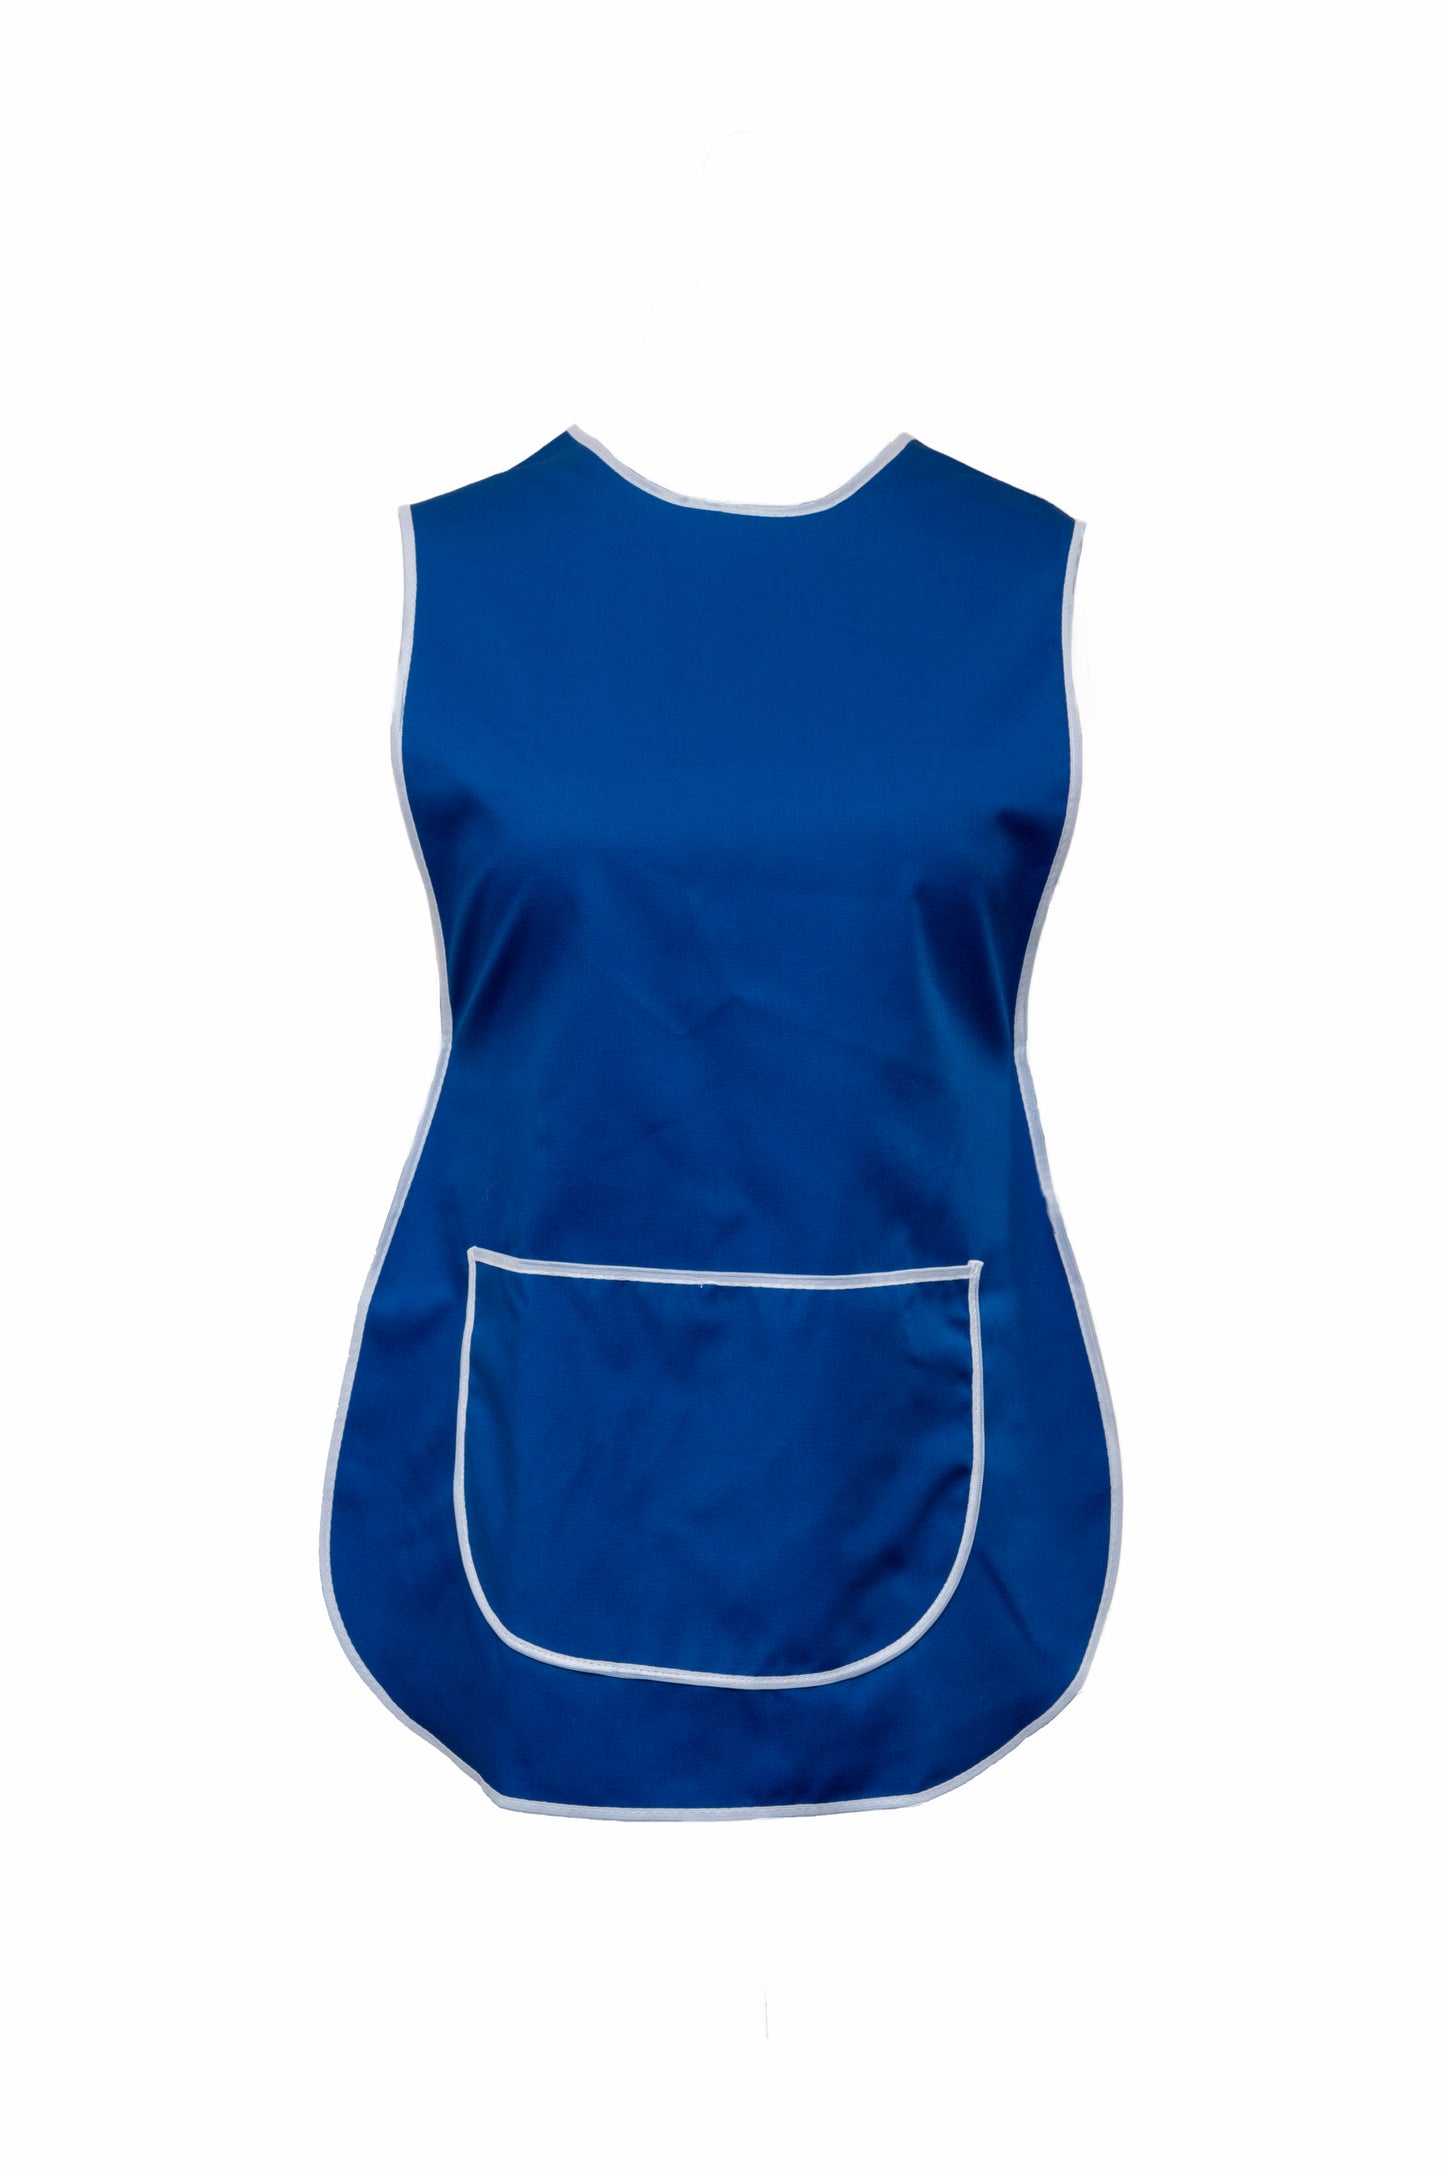 Tabard-Button Side-Over the Head-Plain-Large Front Pocket-Royal Blue